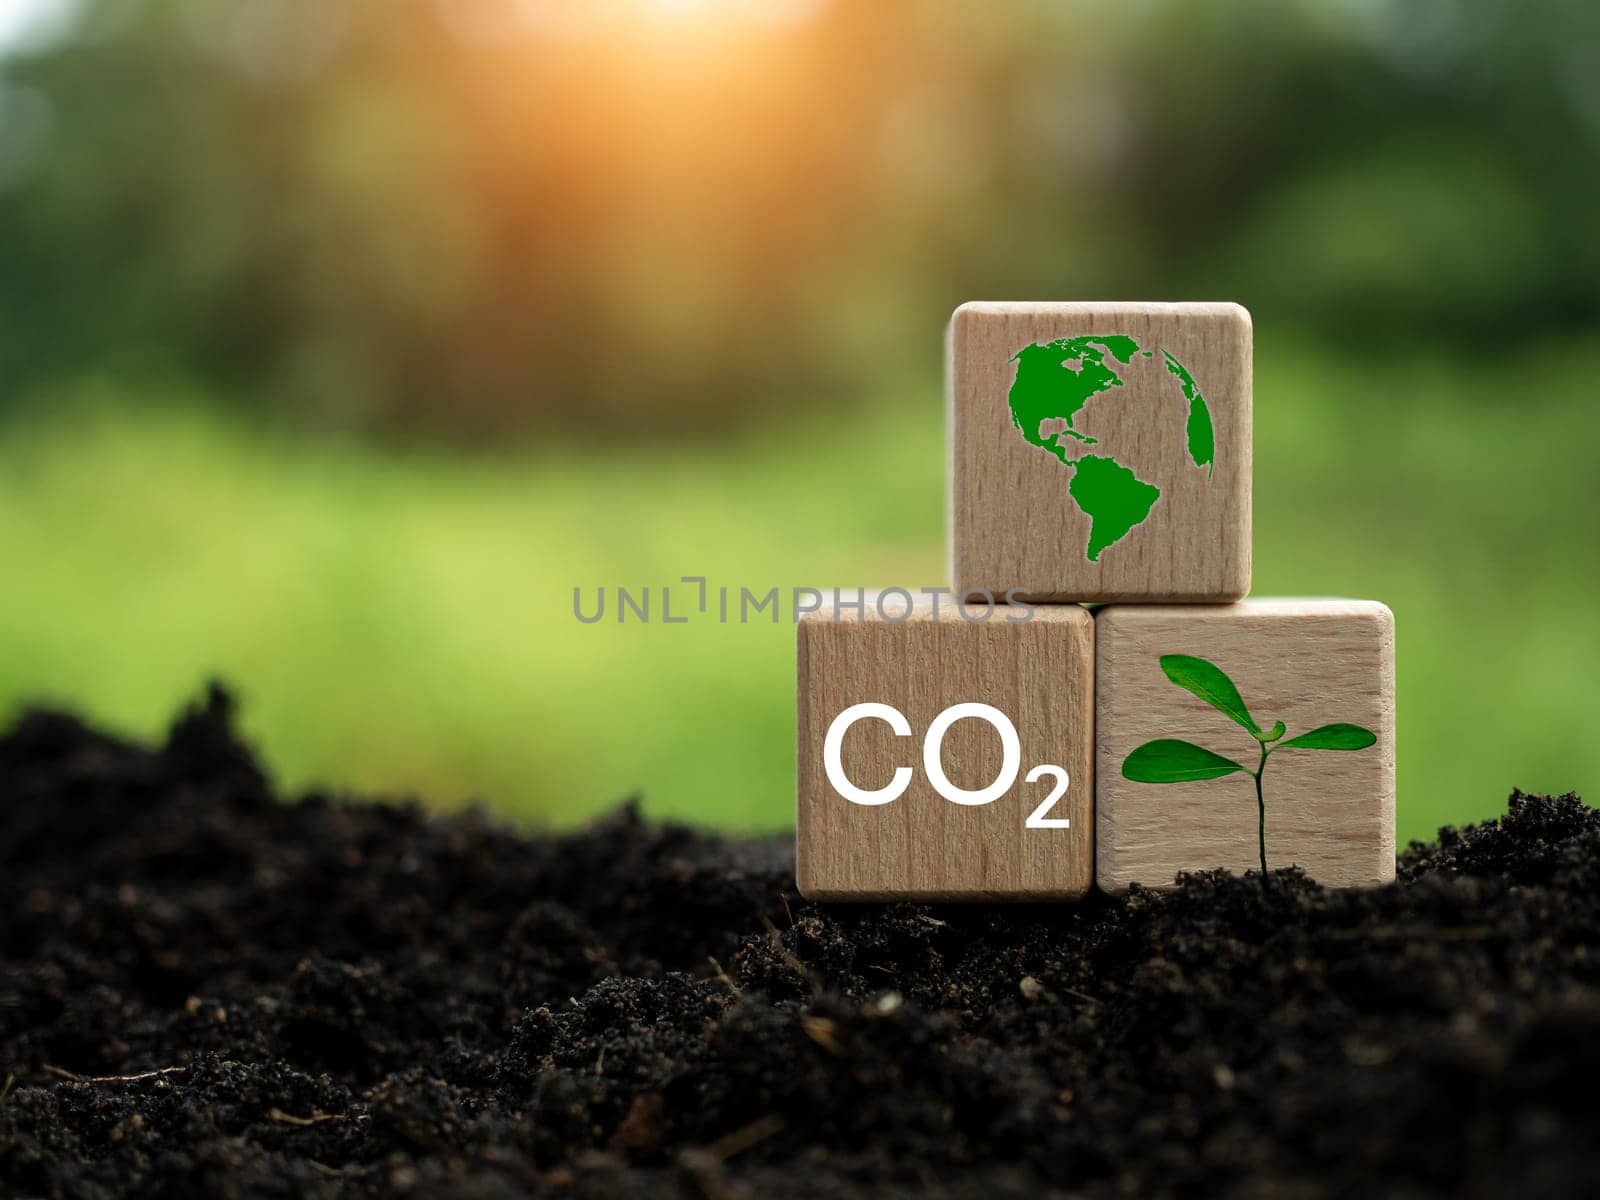 CO2 emission reduction concept, clean and friendly environment without carbon dioxide emissions. Planting trees to reduce CO2 emissions, environmental protection concept.